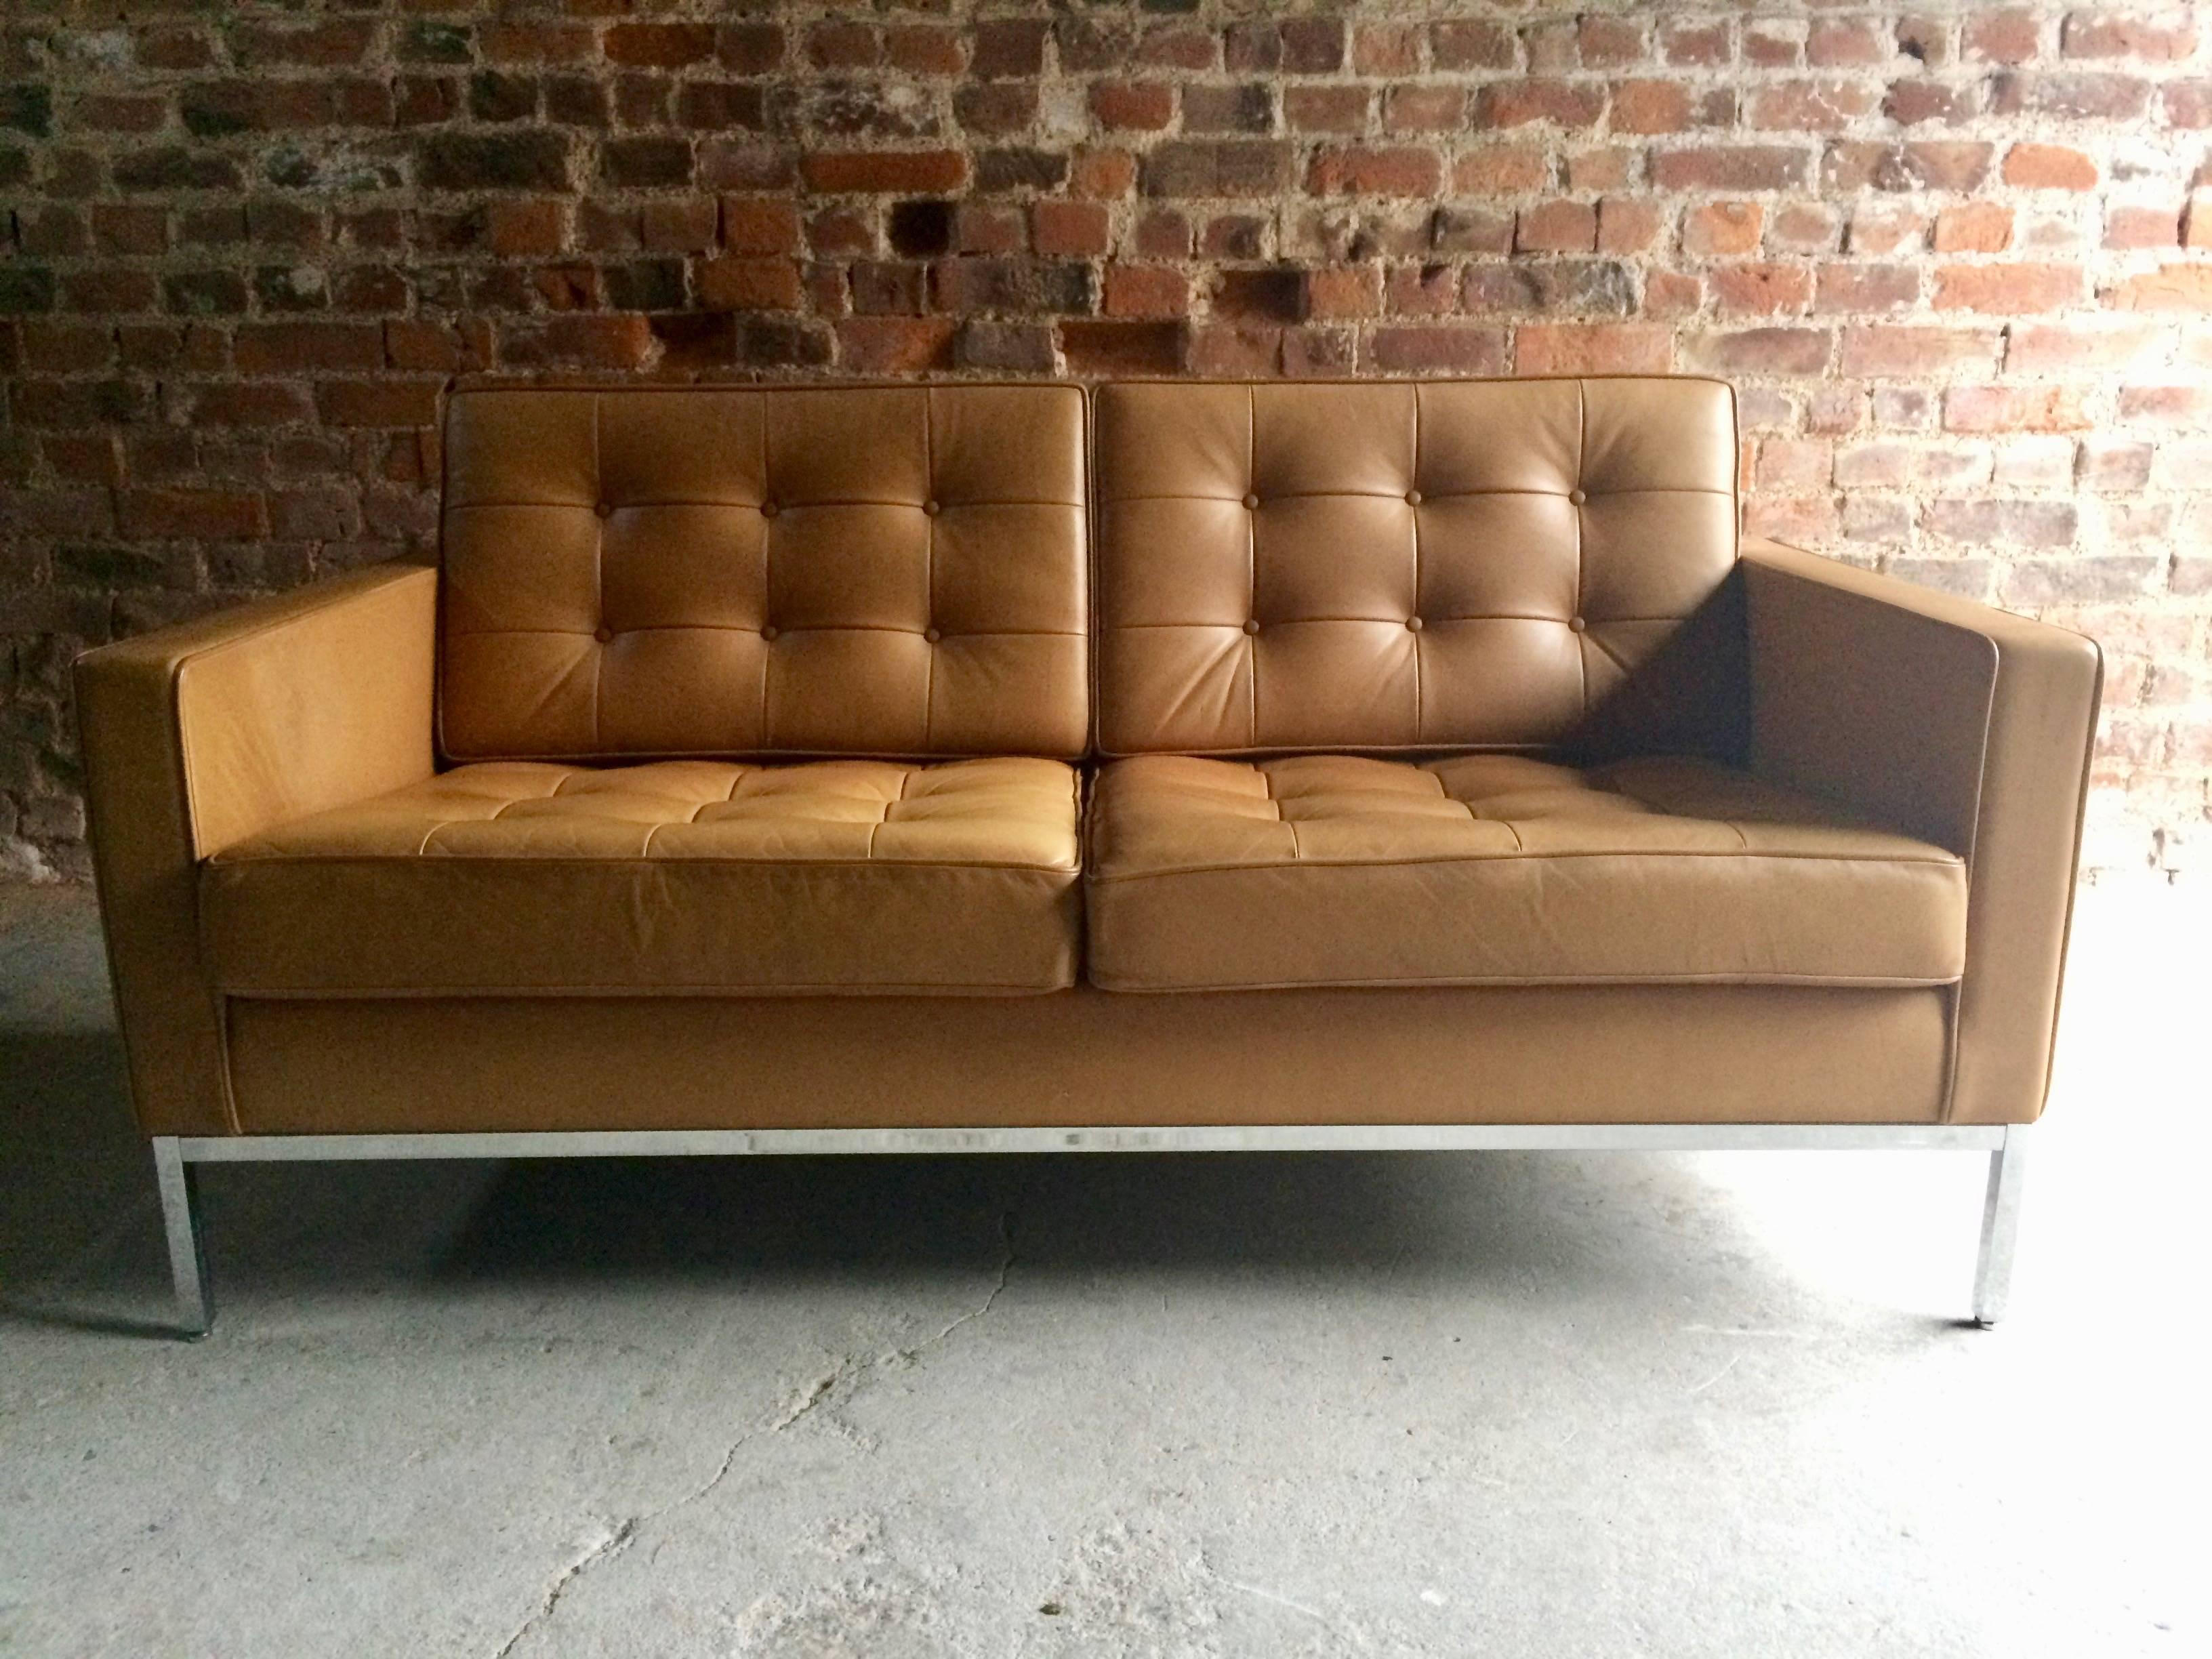 Original Florence Knoll by Knoll Studio two-seat tan leather sofa (one of a pair we have for sale), like so many of her groundbreaking designs that became the gold standard for the industry, Florence Knoll's 1954 lounge collection has made its way